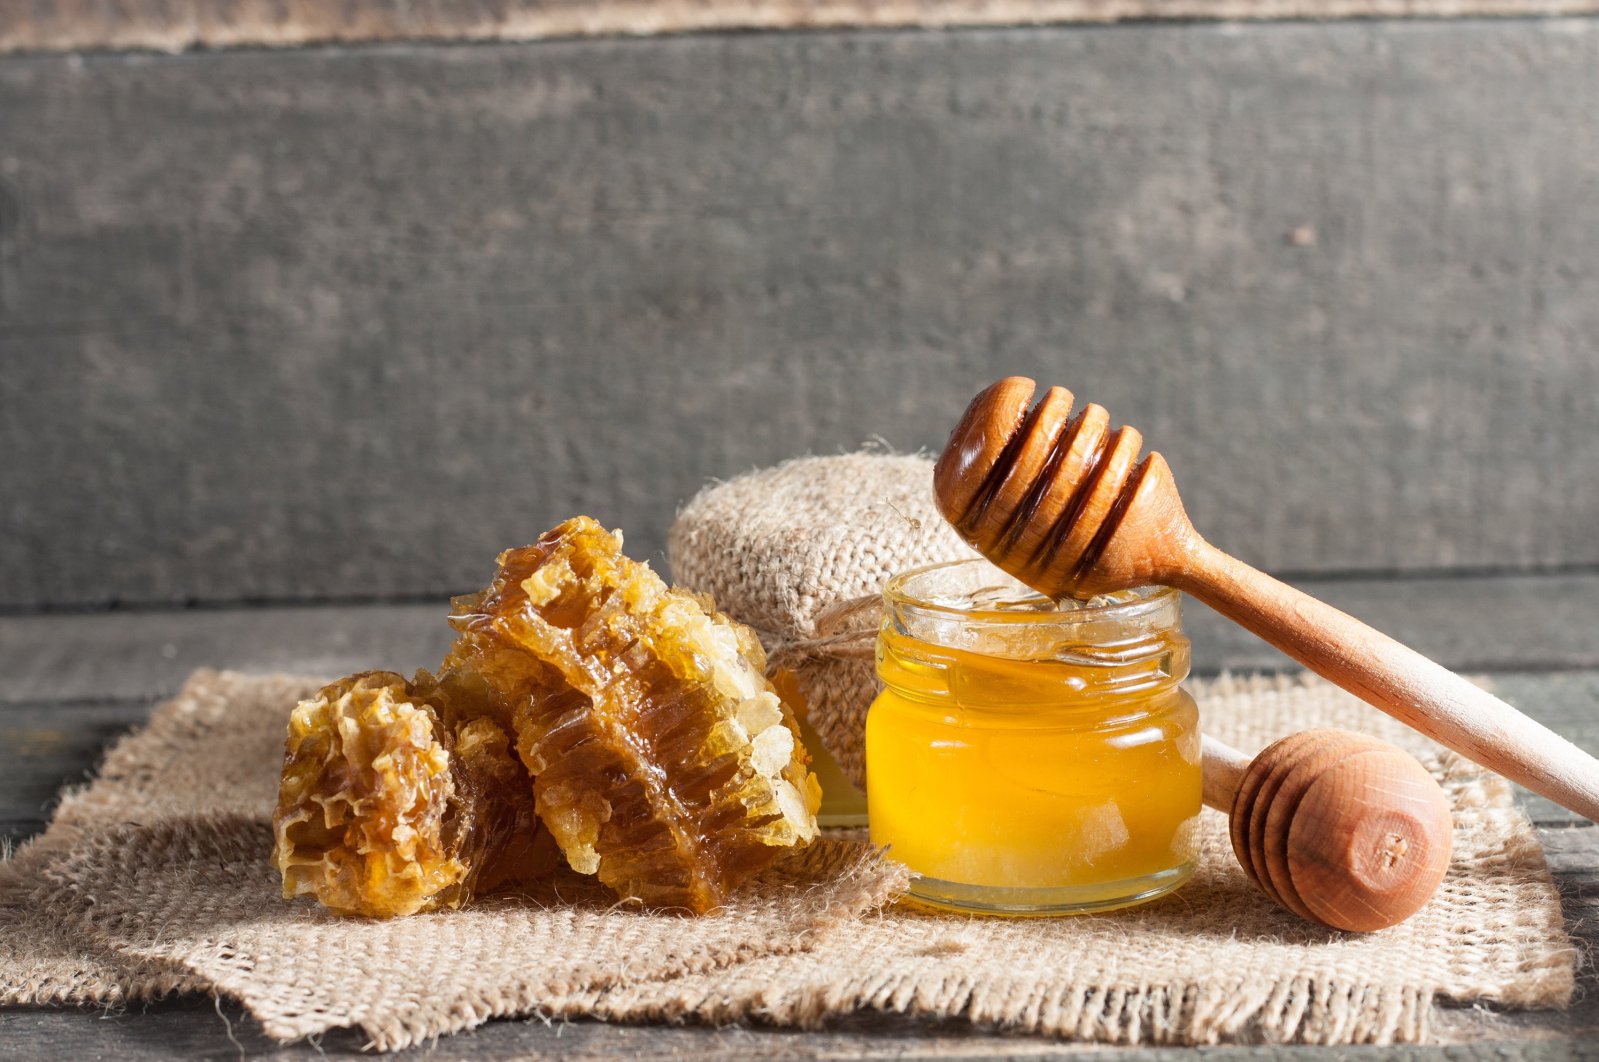 Raise a hand if you were ever recommended to eat a teaspoon of honey or add...